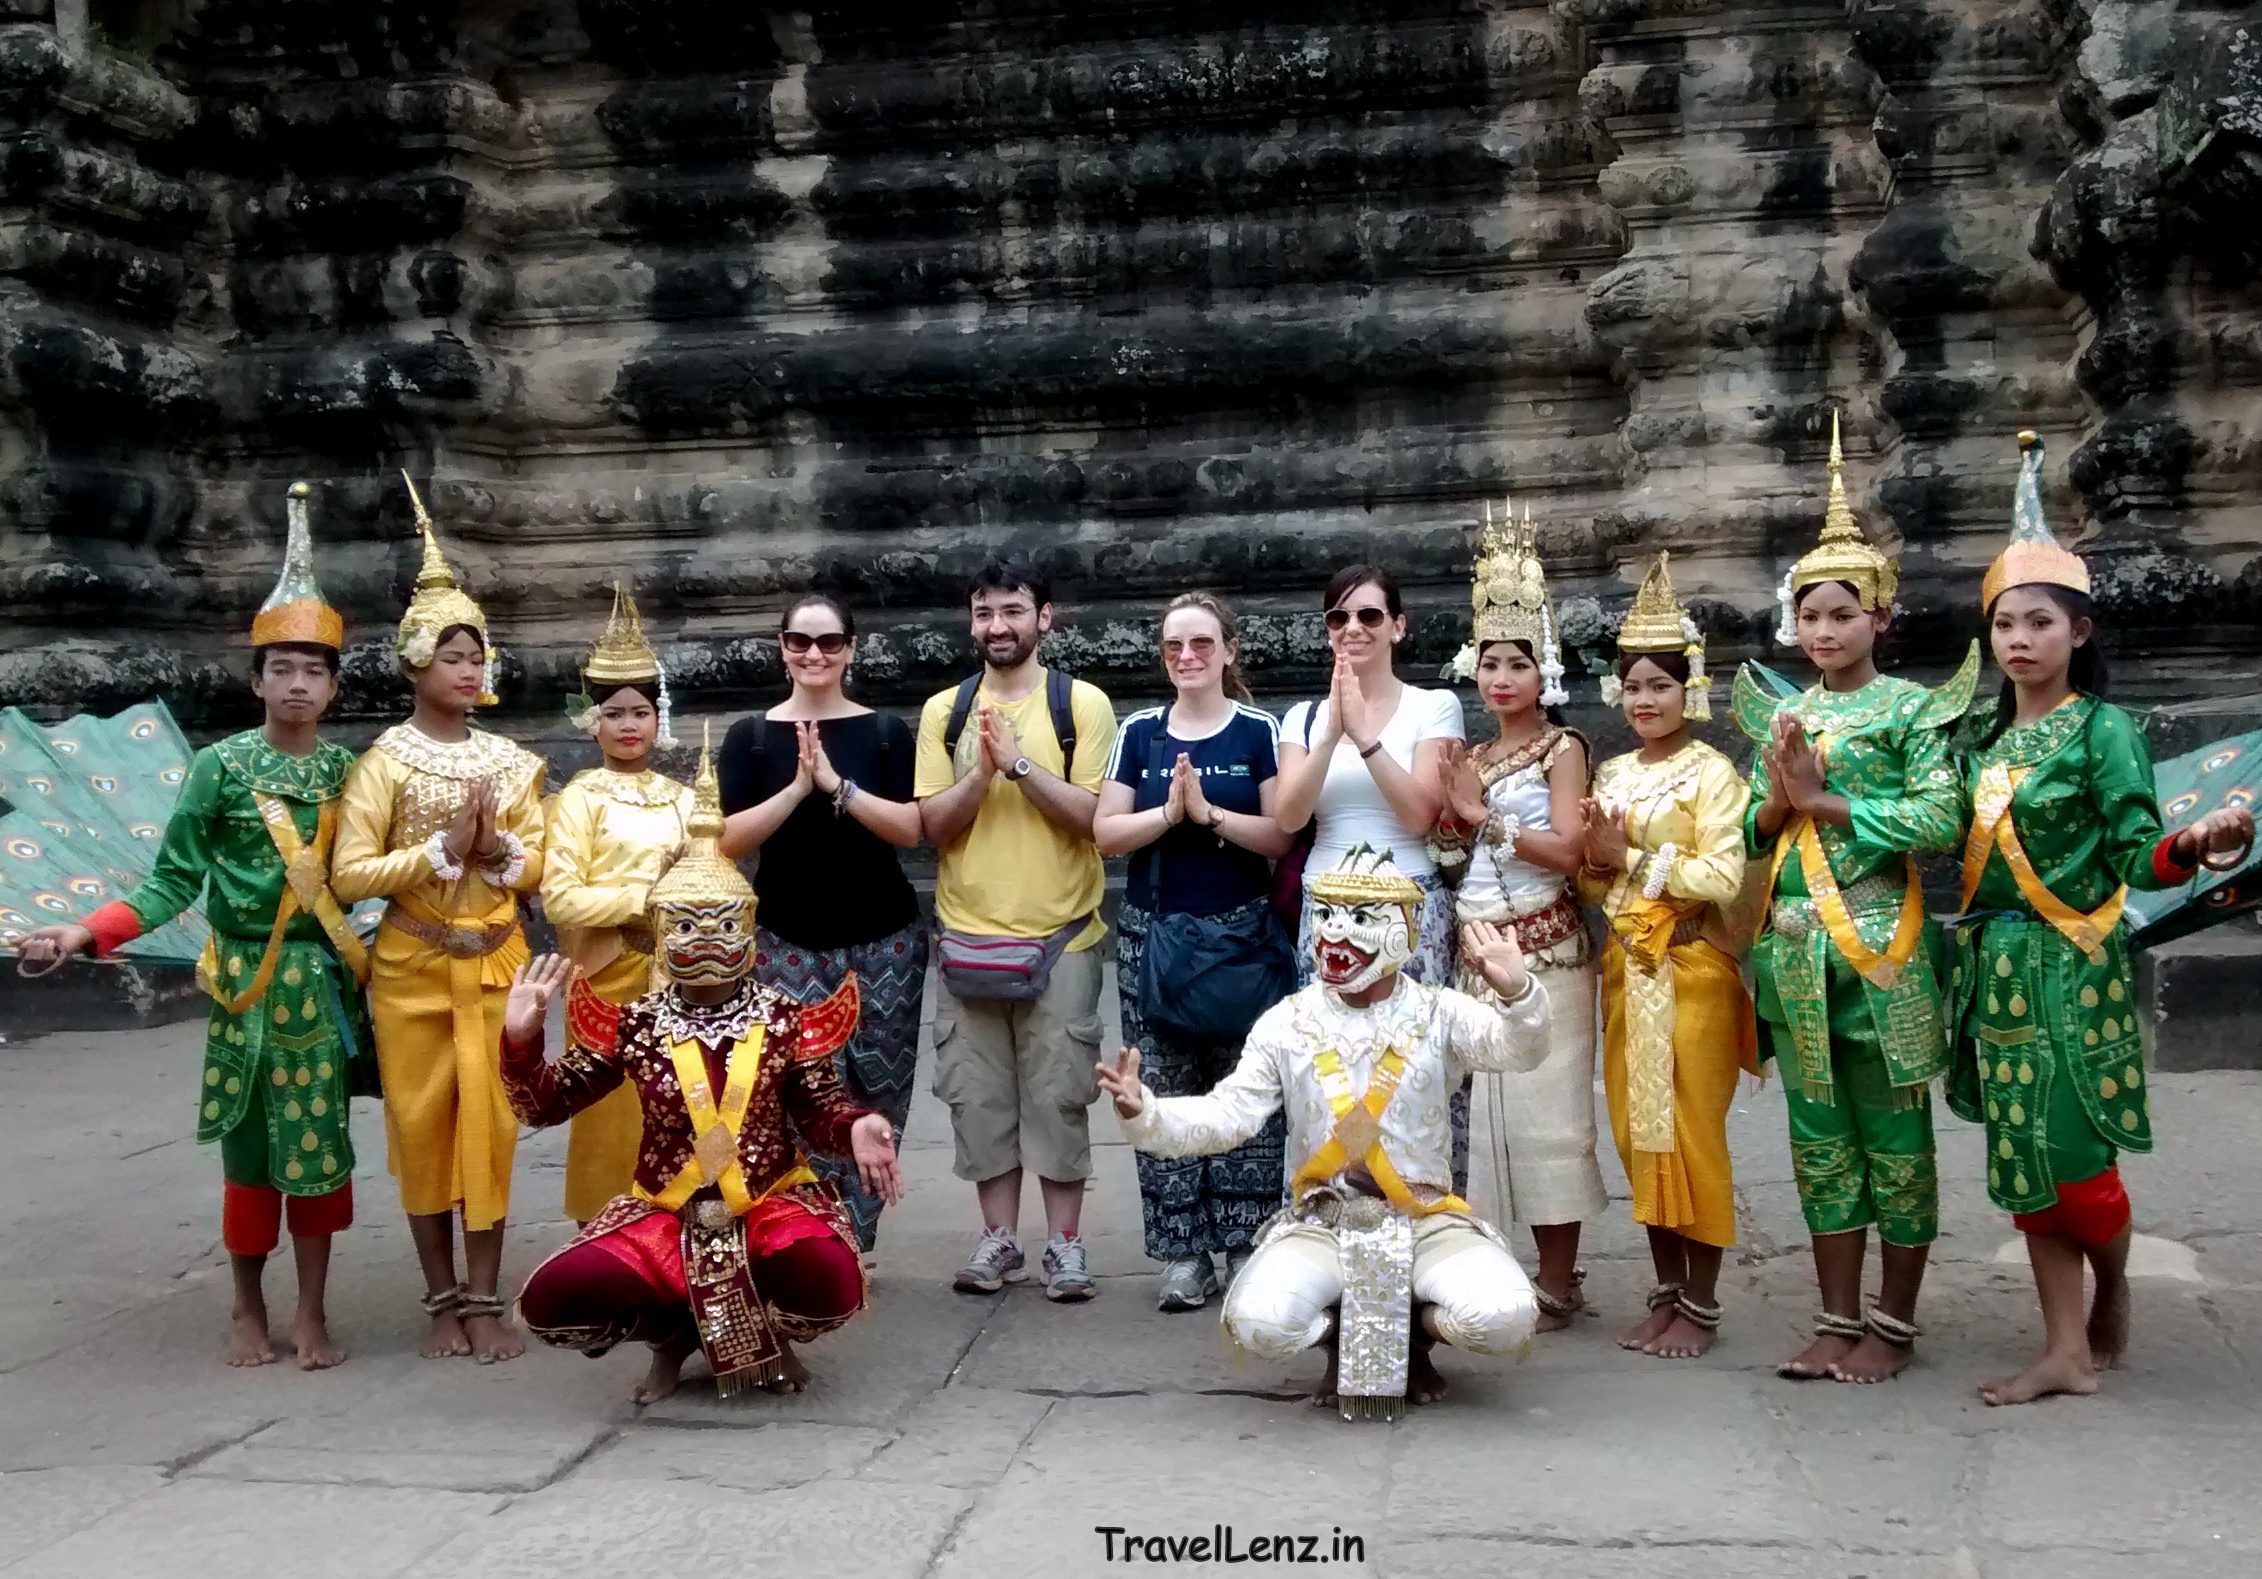 Apsara dancers in traditional Khmer attire posing for tourists in Angkor Wat